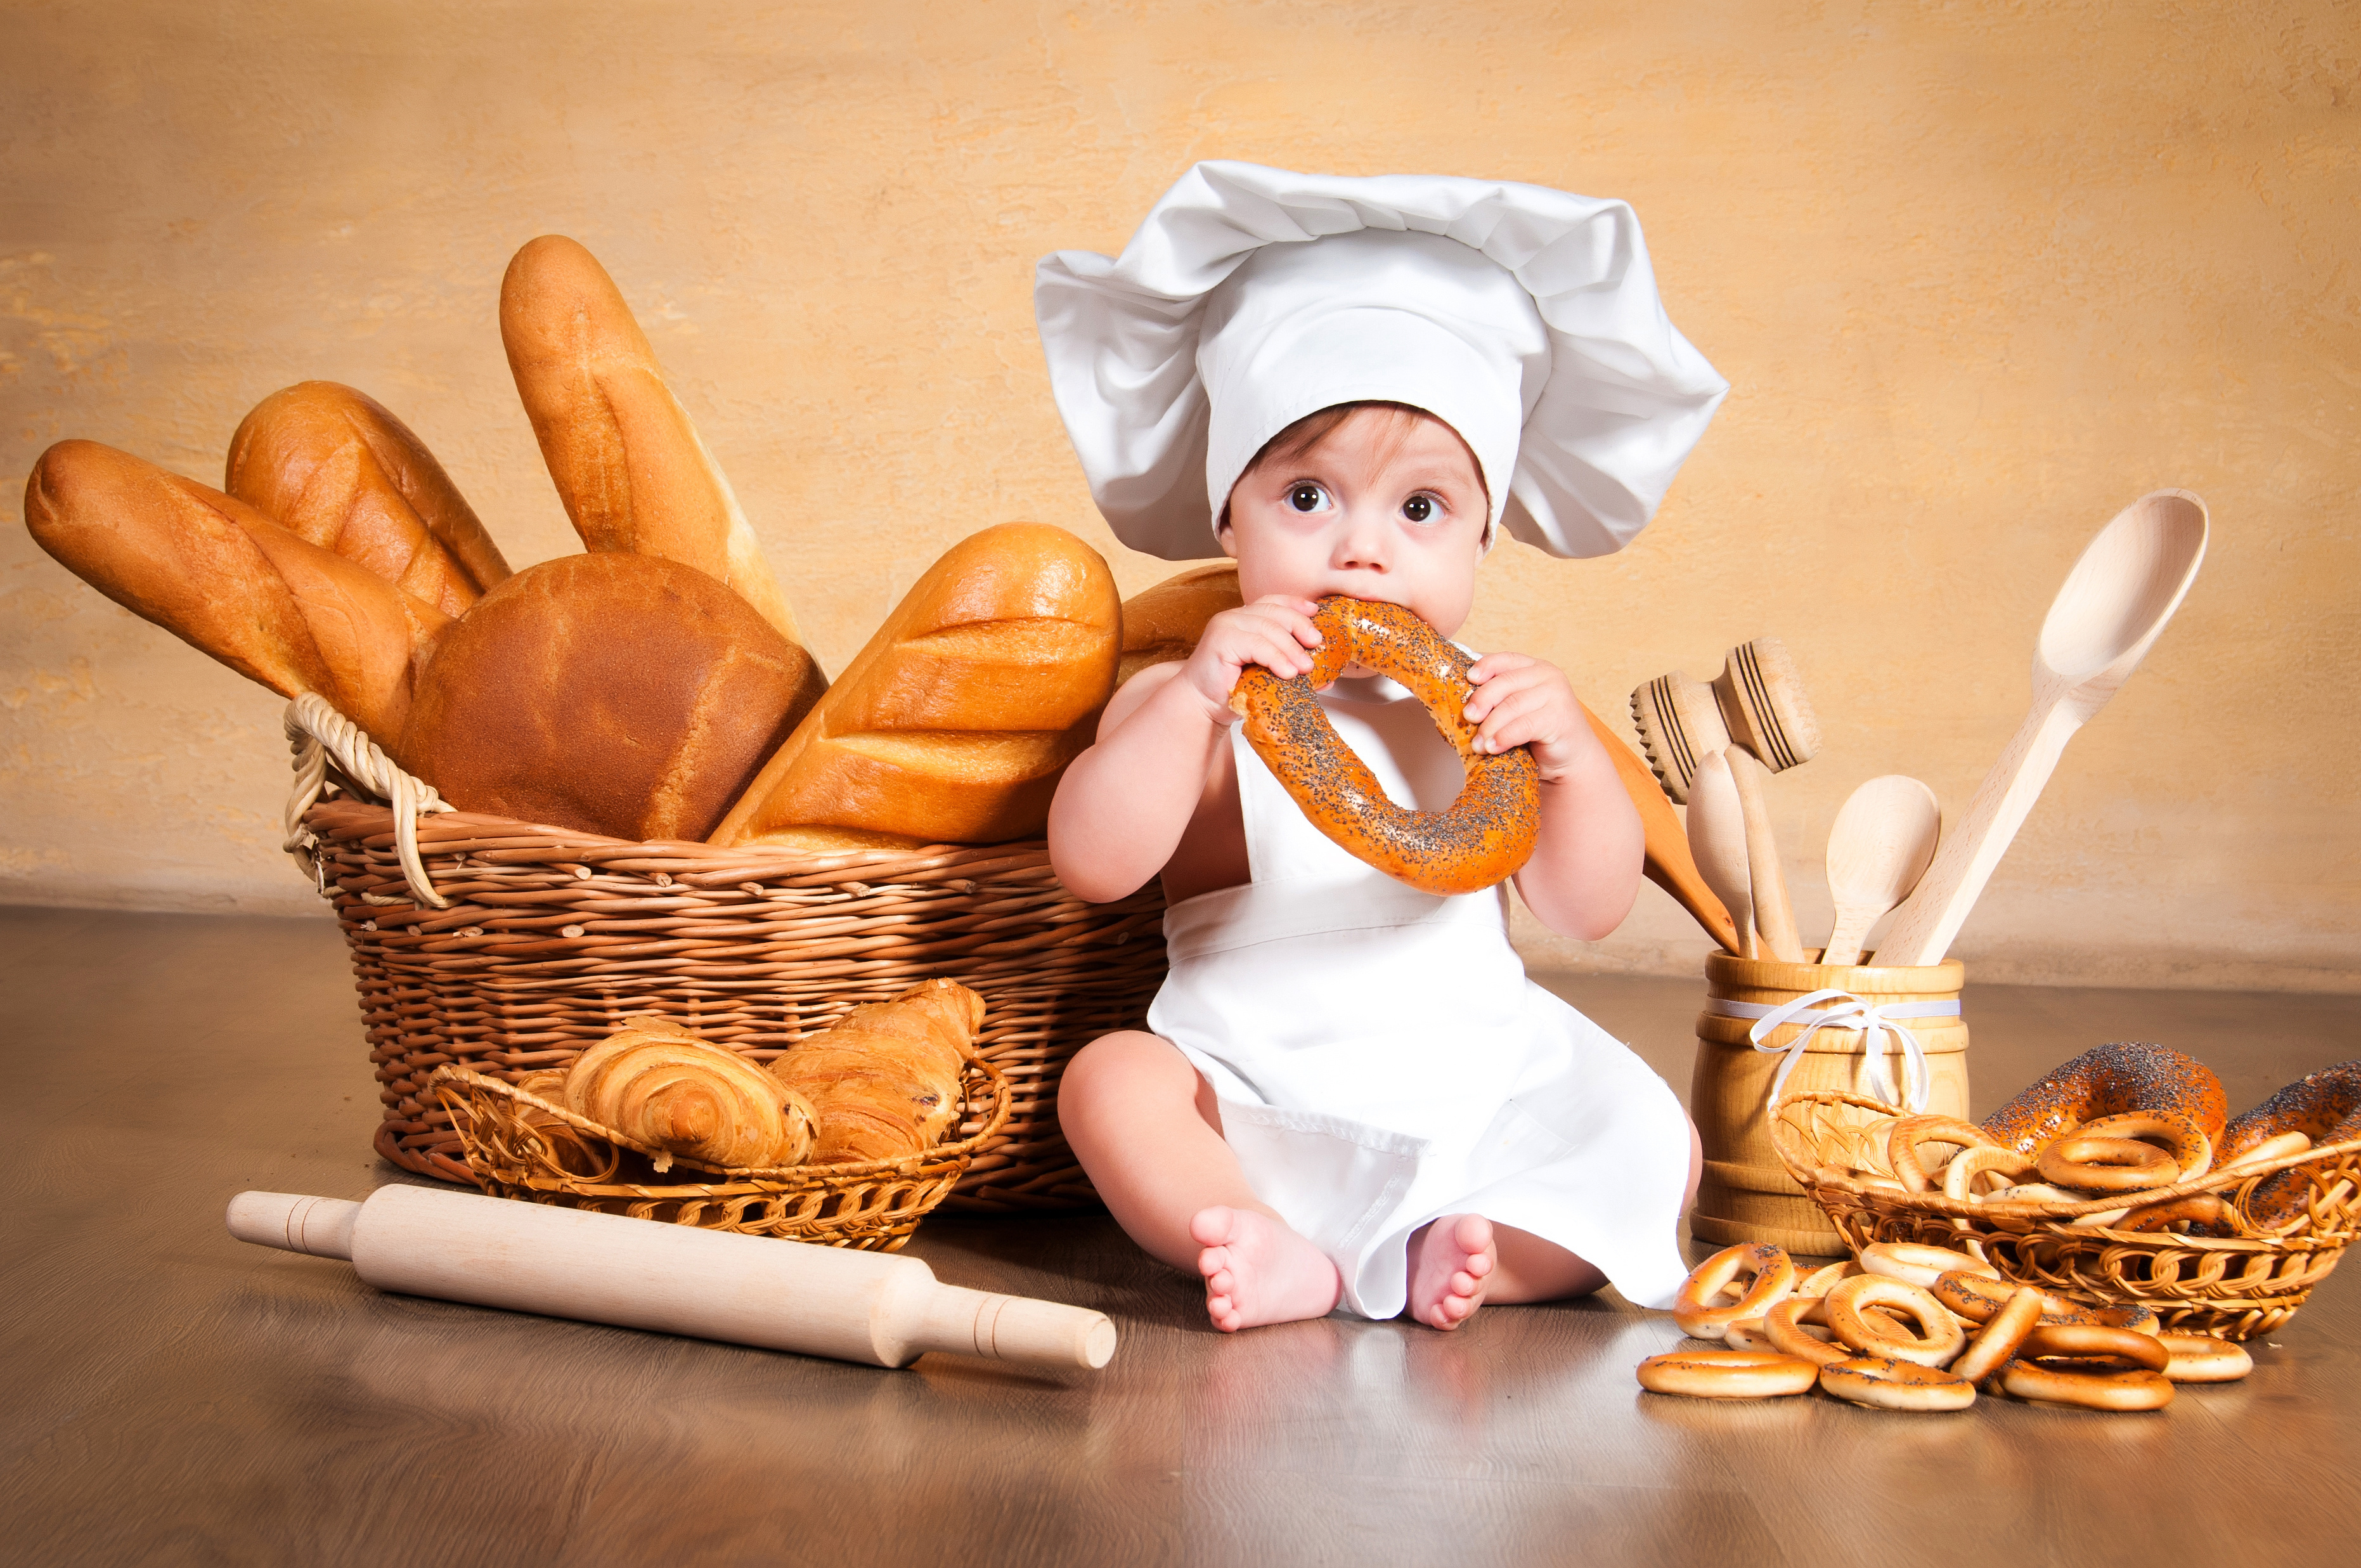 photography, baby, baking, bread, chef, child, croissant